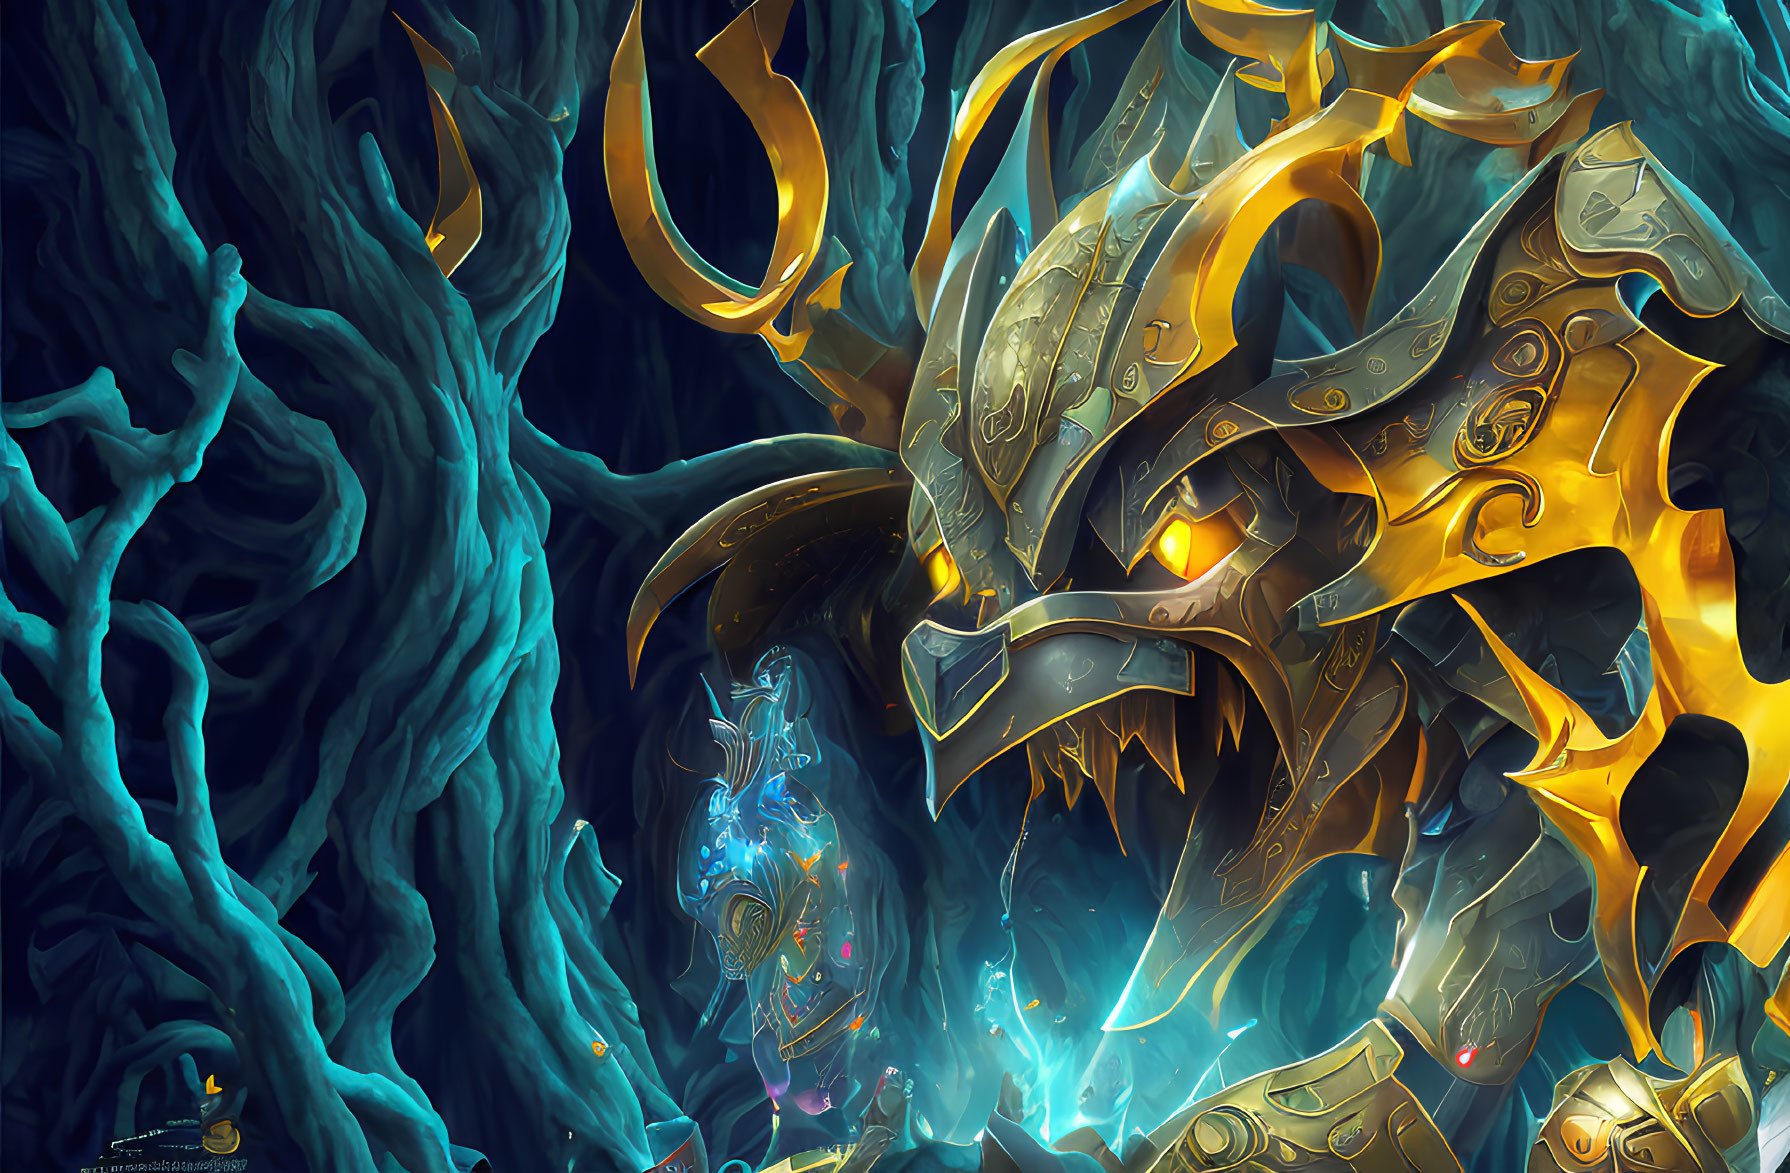 Golden Armored Dragon with Glowing Blue Eyes in Twisted Blue Cavern